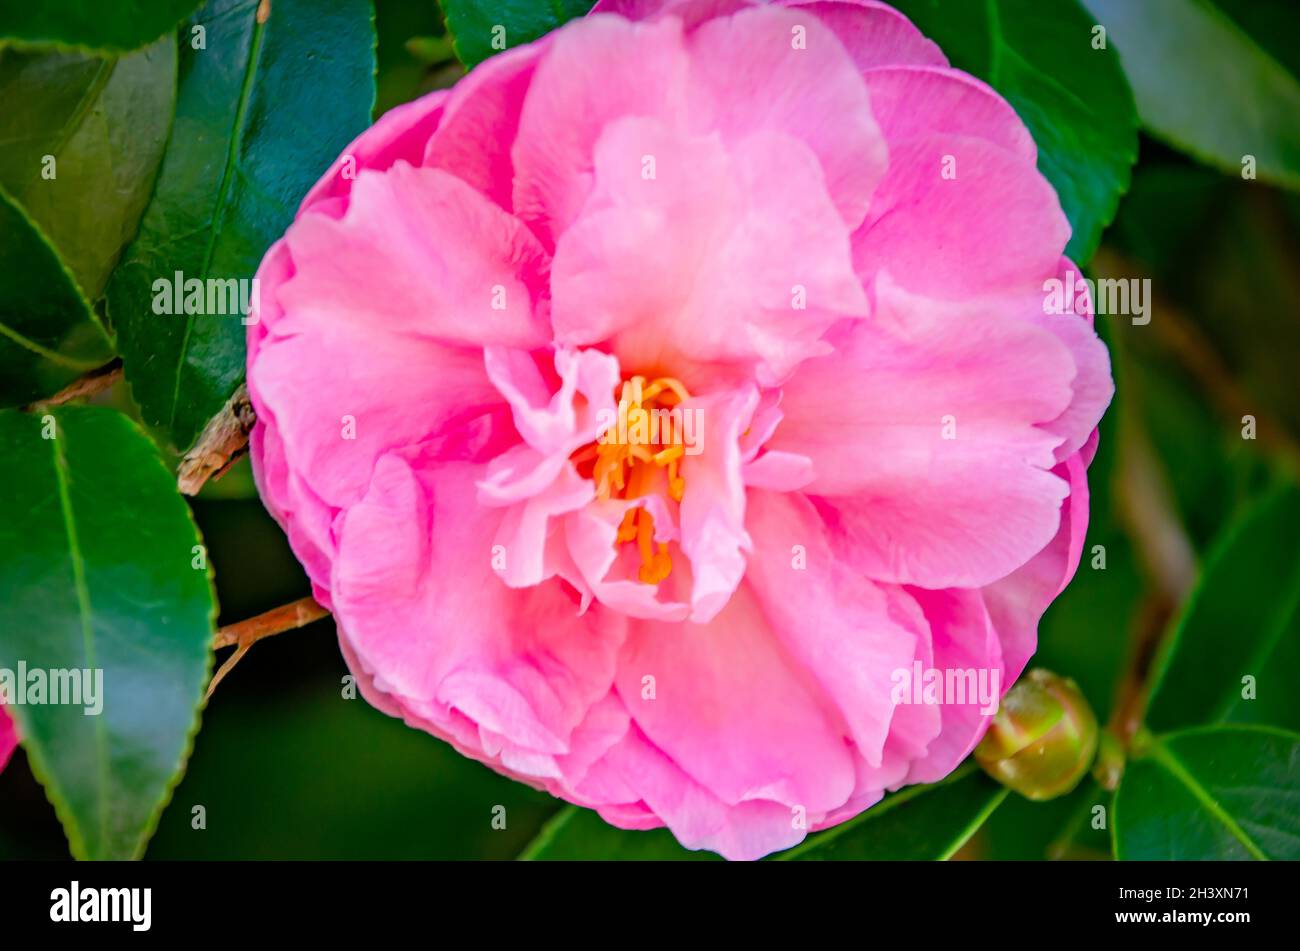 A pink Japanese camellia (Camellia japonica) blooms, Oct. 23, 2021, in Fairhope, Alabama. Japanese camellias are native to Japan. Stock Photo